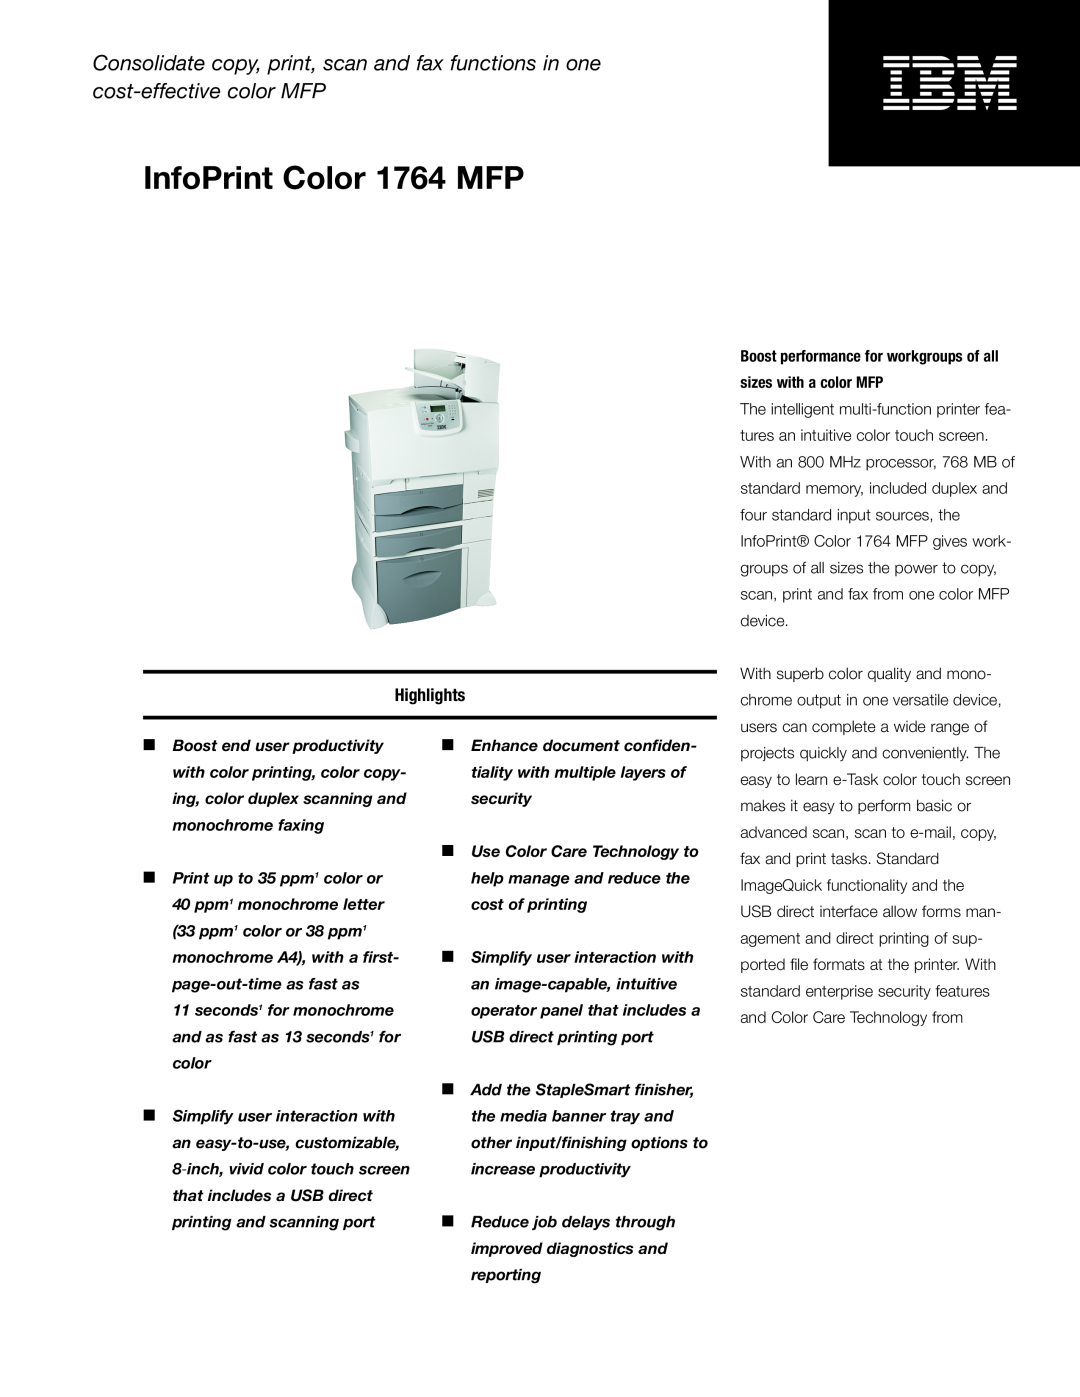 IBM manual Highlights, Boost performance for workgroups of all sizes with a color MFP, InfoPrint Color 1764 MFP 